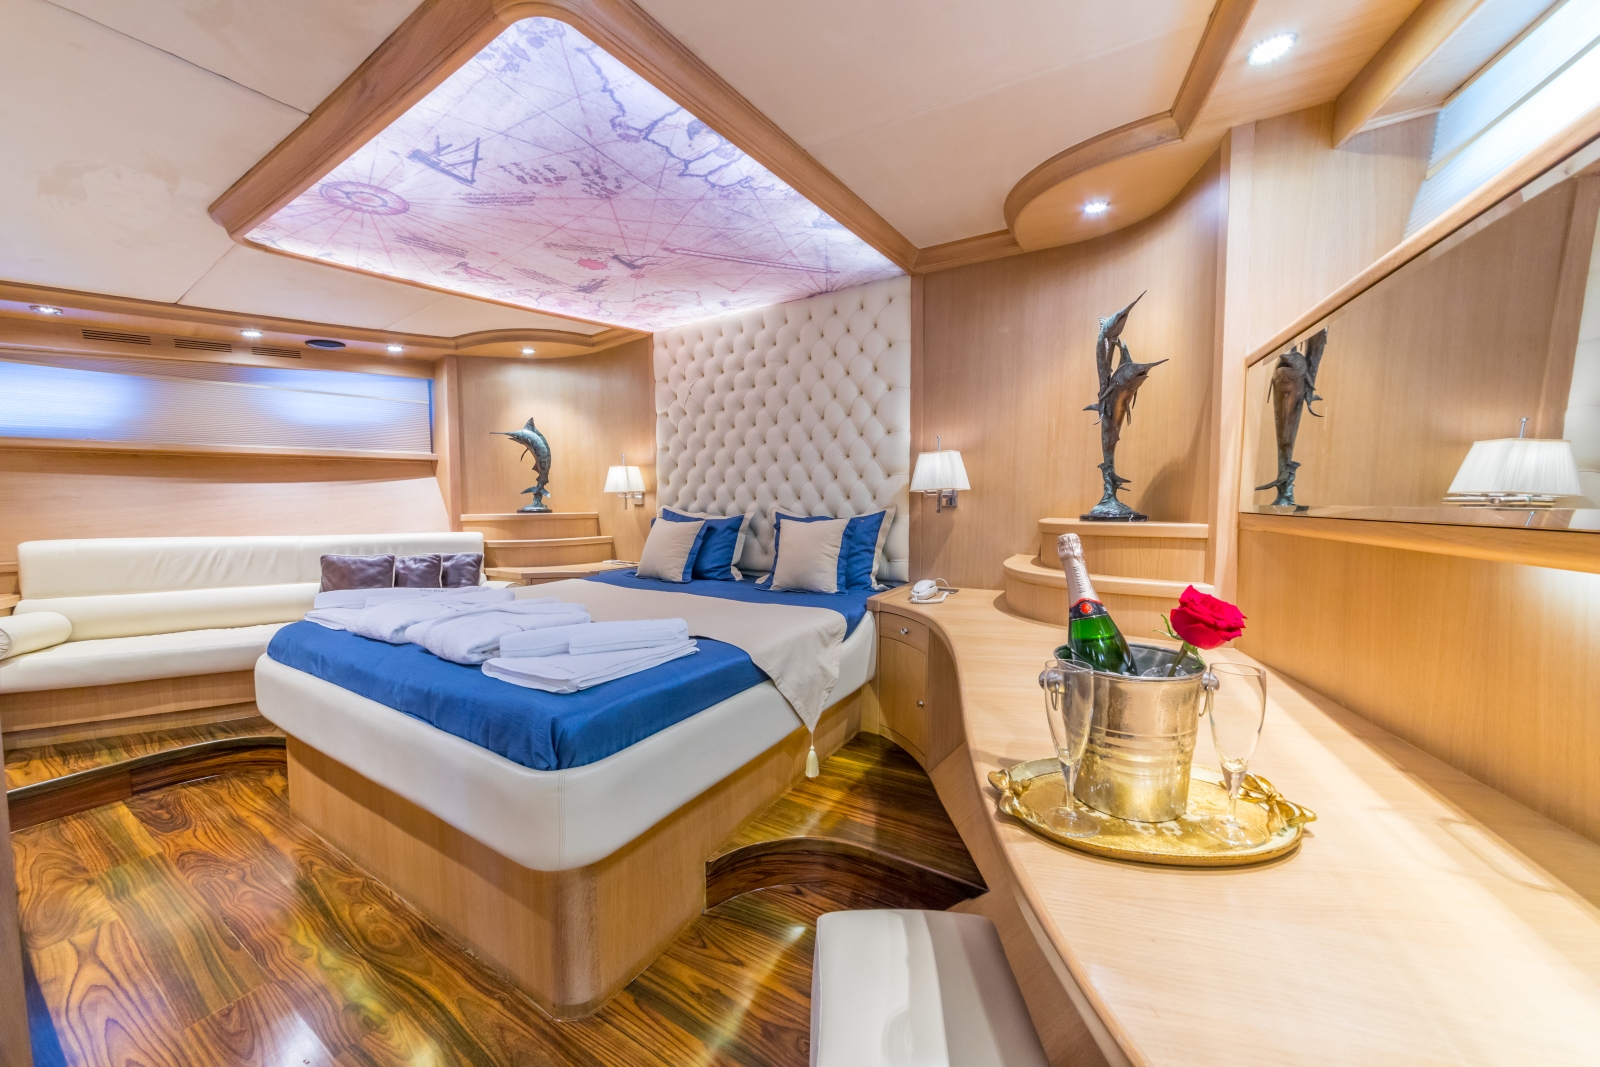 Spacious Double cabin with seating onboard the luxury gulet Blue Heaven